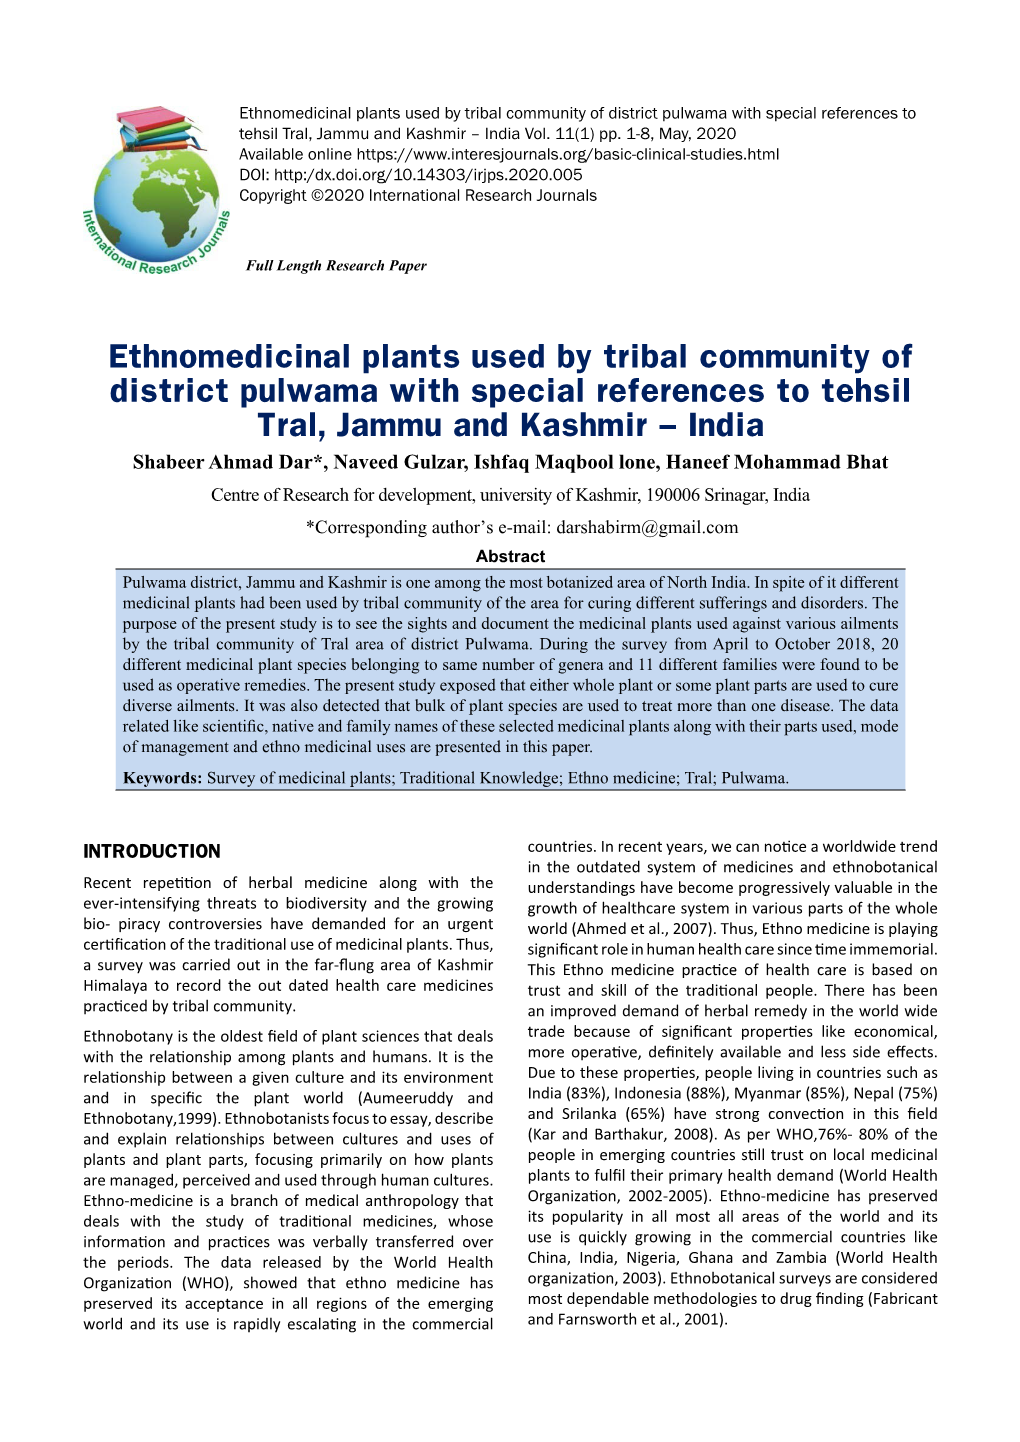 Ethnomedicinal Plants Used by Tribal Community of District Pulwama with Special References to Tehsil Tral, Jammu and Kashmir – India Vol